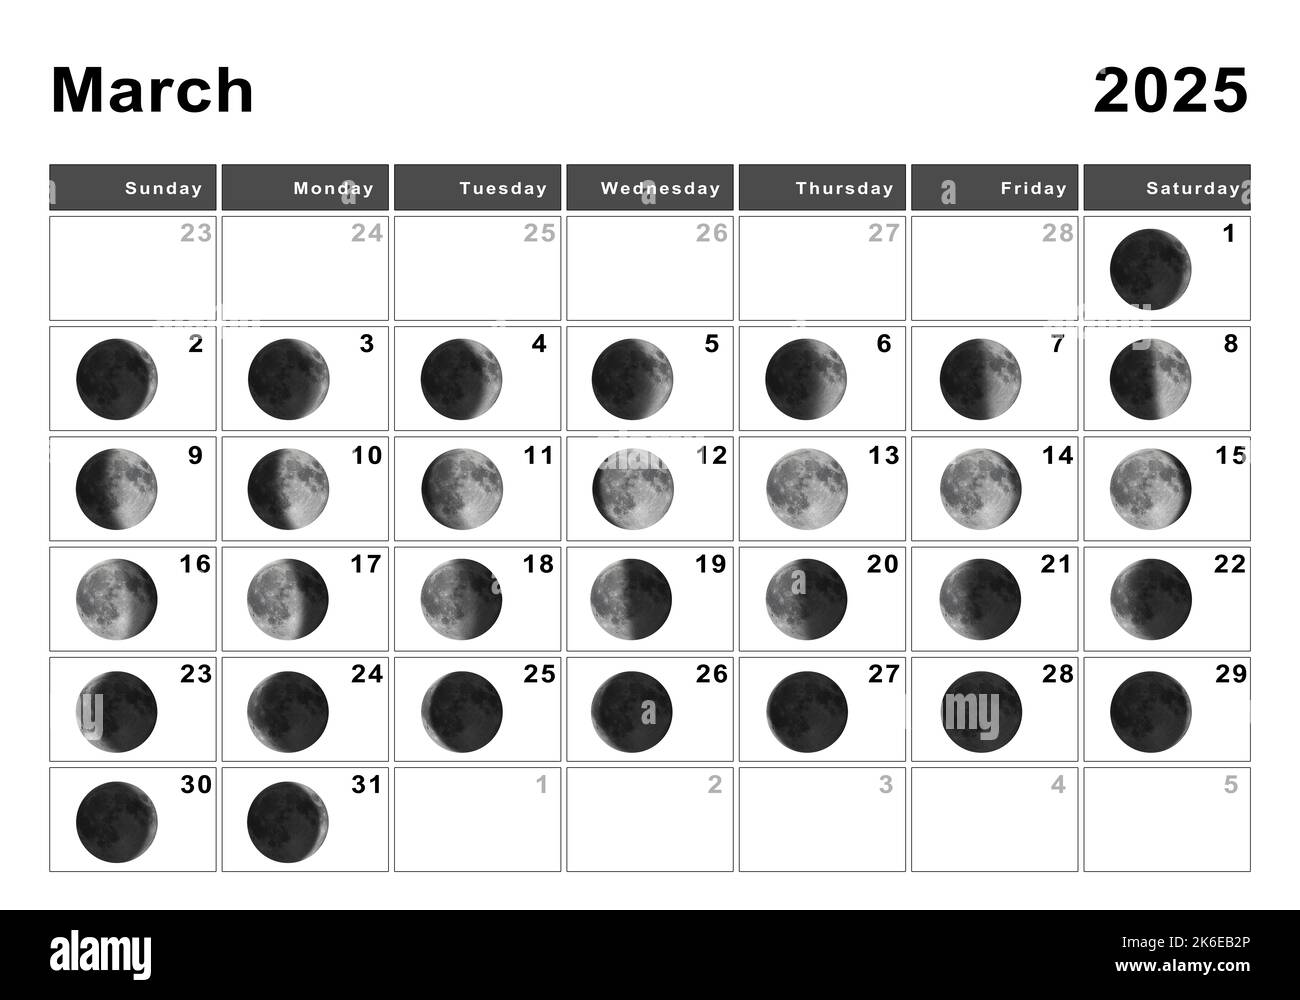 march-2025-lunar-calendar-moon-cycles-moon-phases-stock-photo-alamy